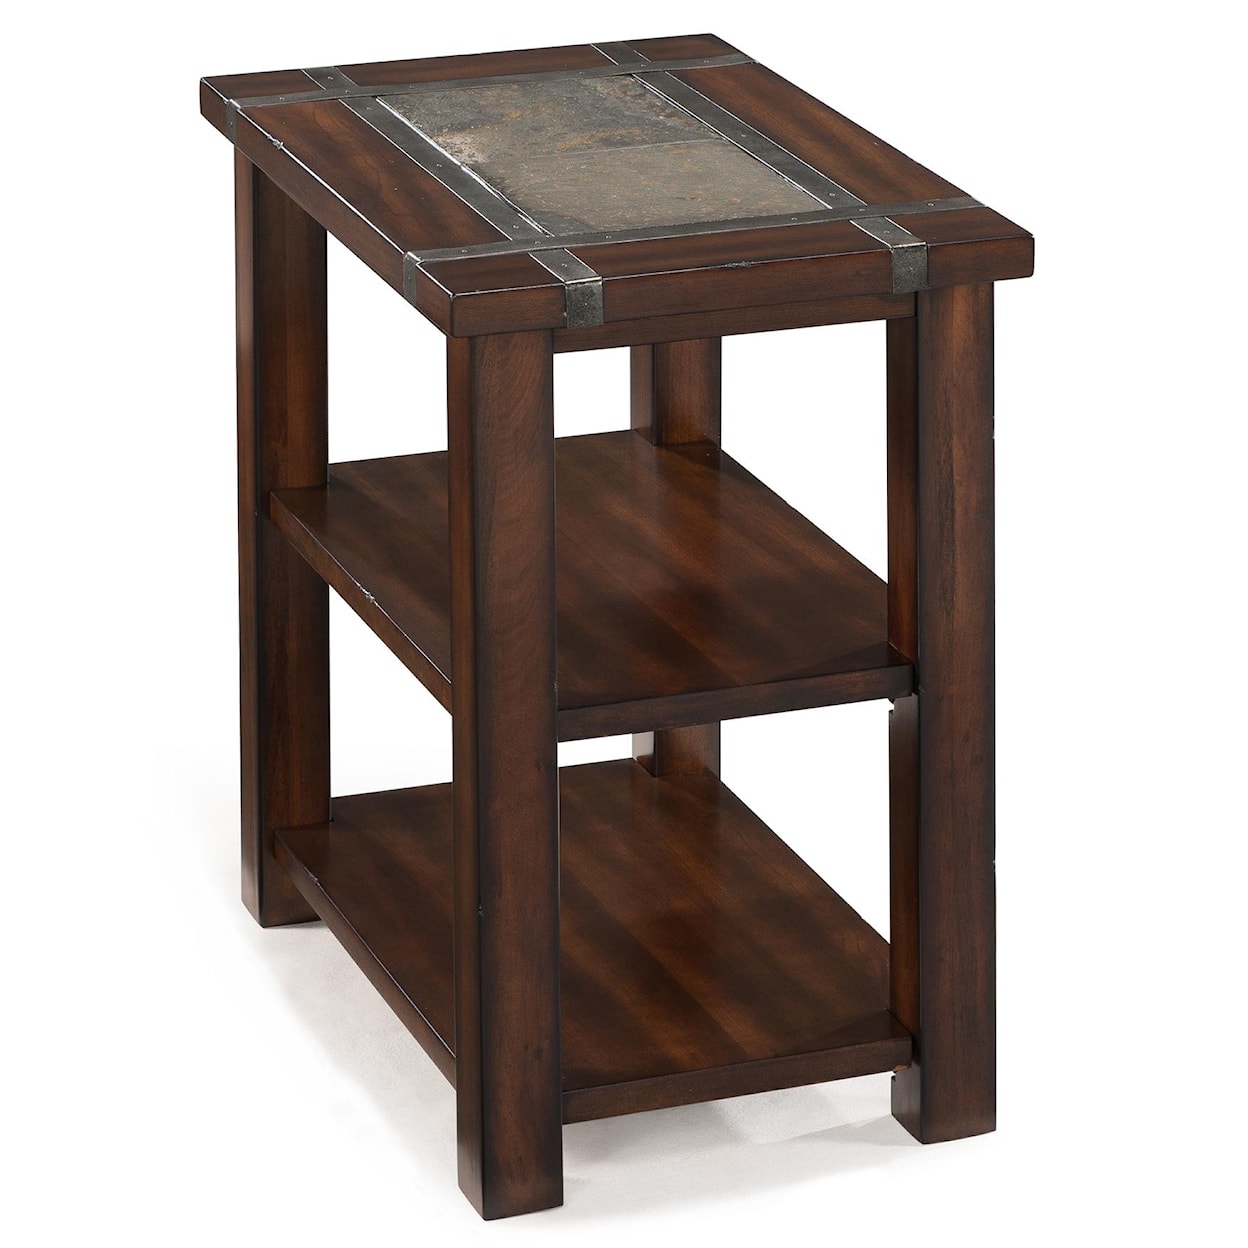 Magnussen Home Roanoke Occasional Tables Rectangular Chairside End Table